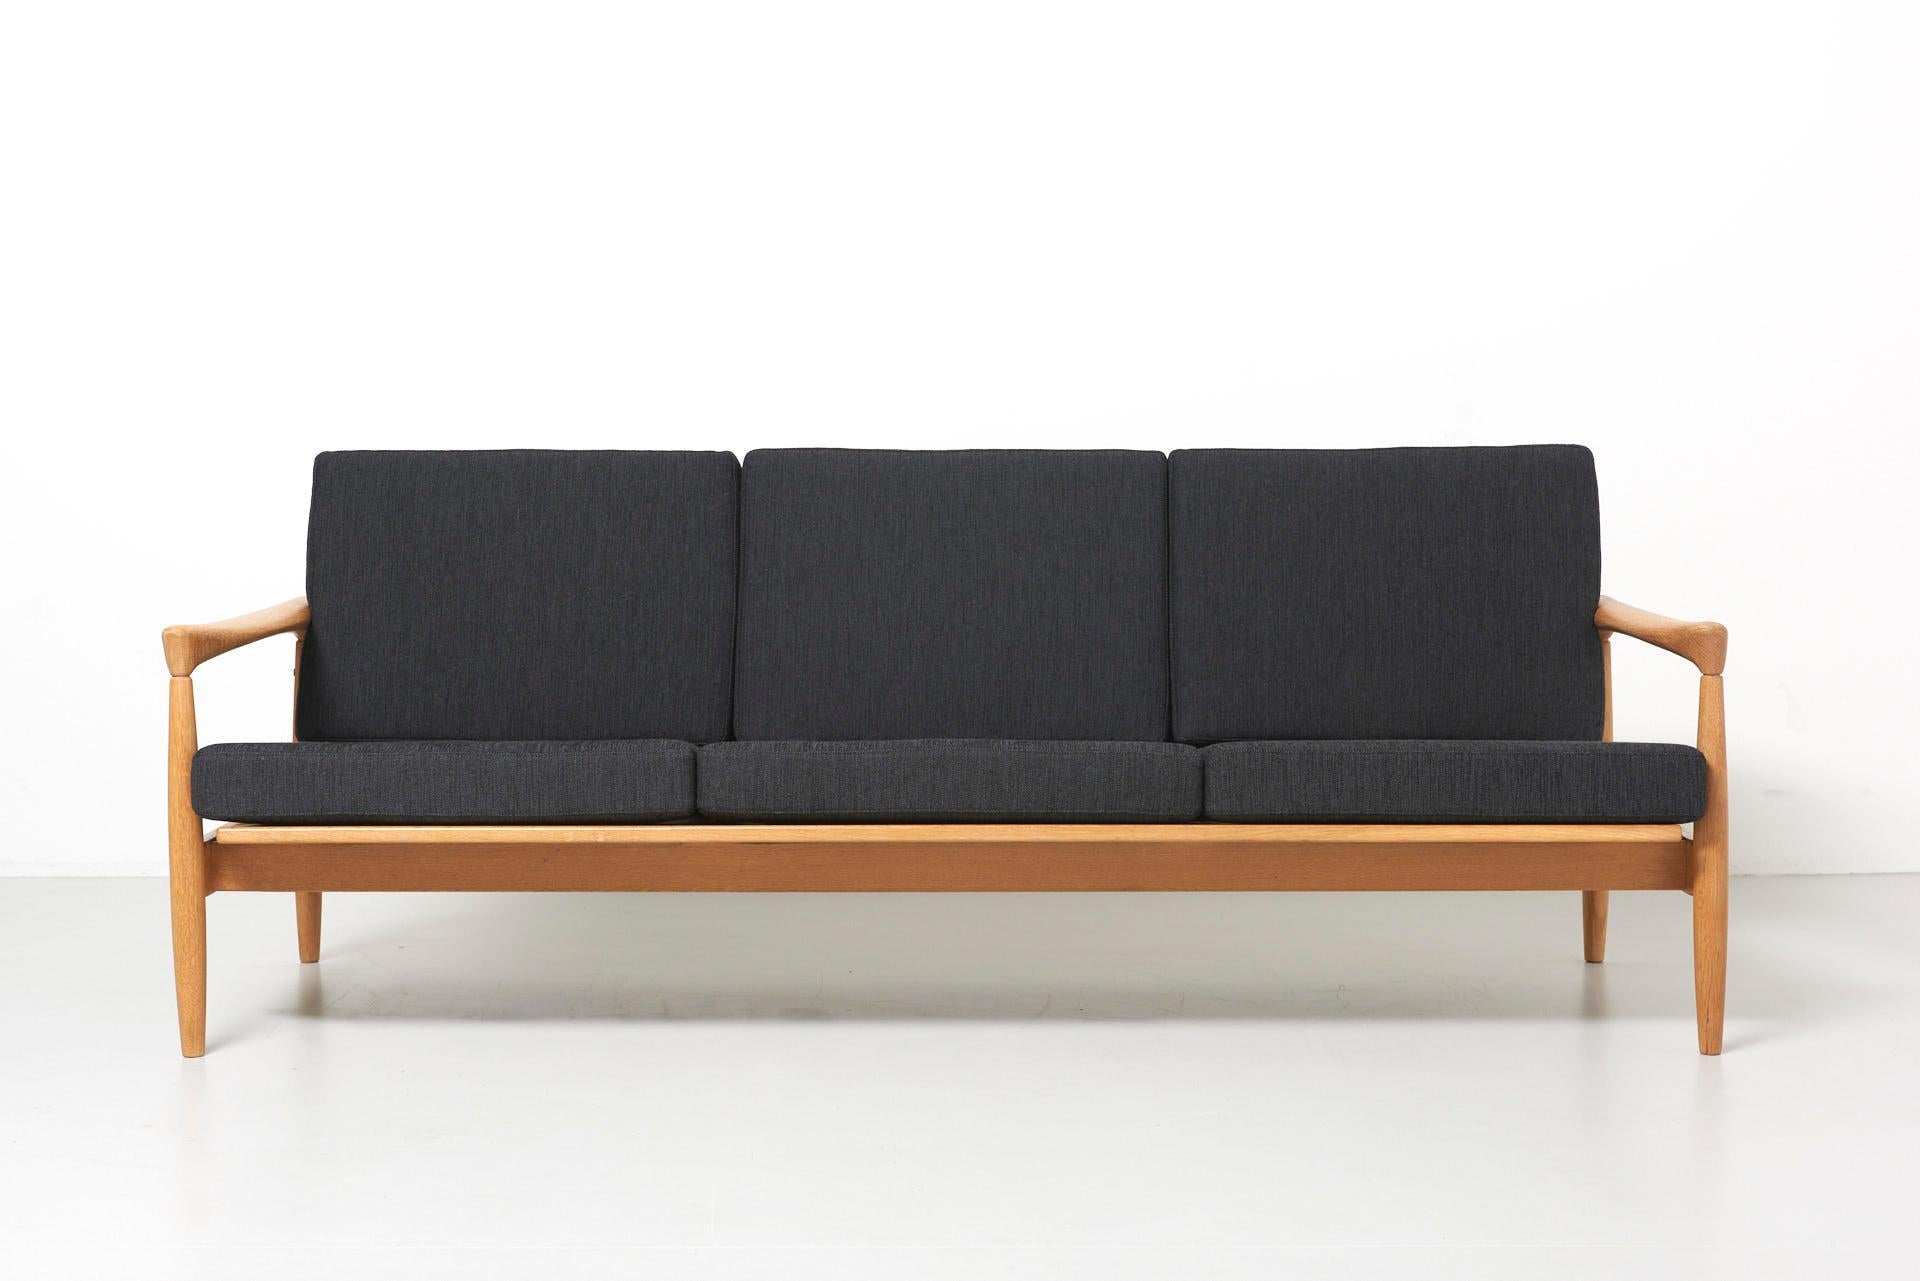 A sofa in oak with new black coushins.